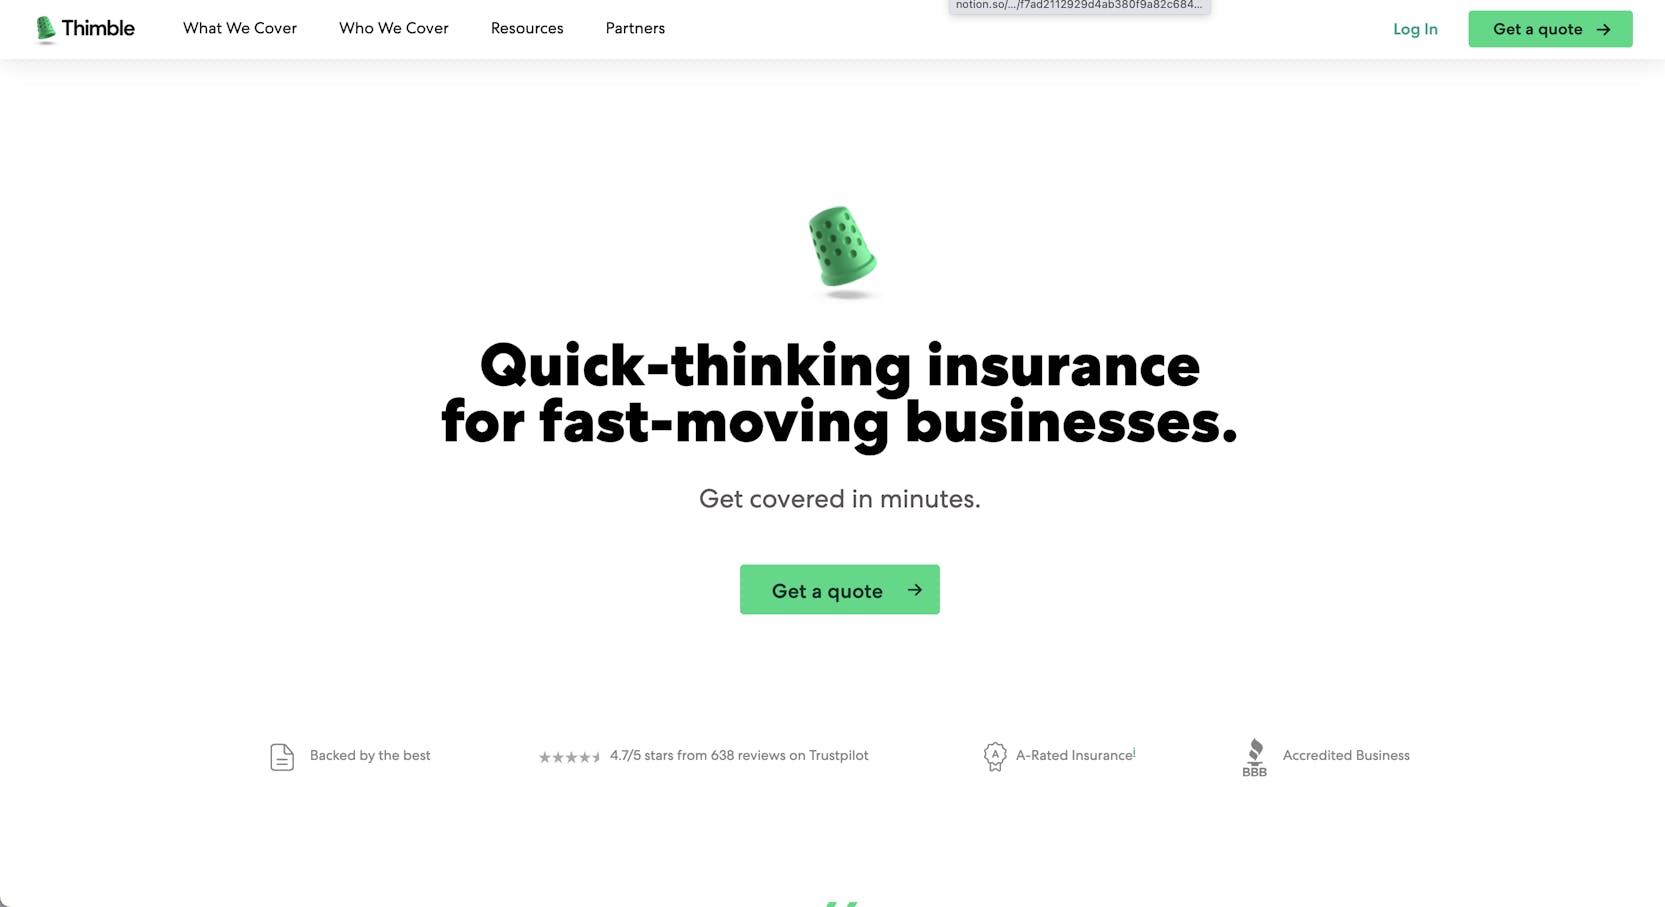 How to Get Vendor Insurance for One Day - Thimble